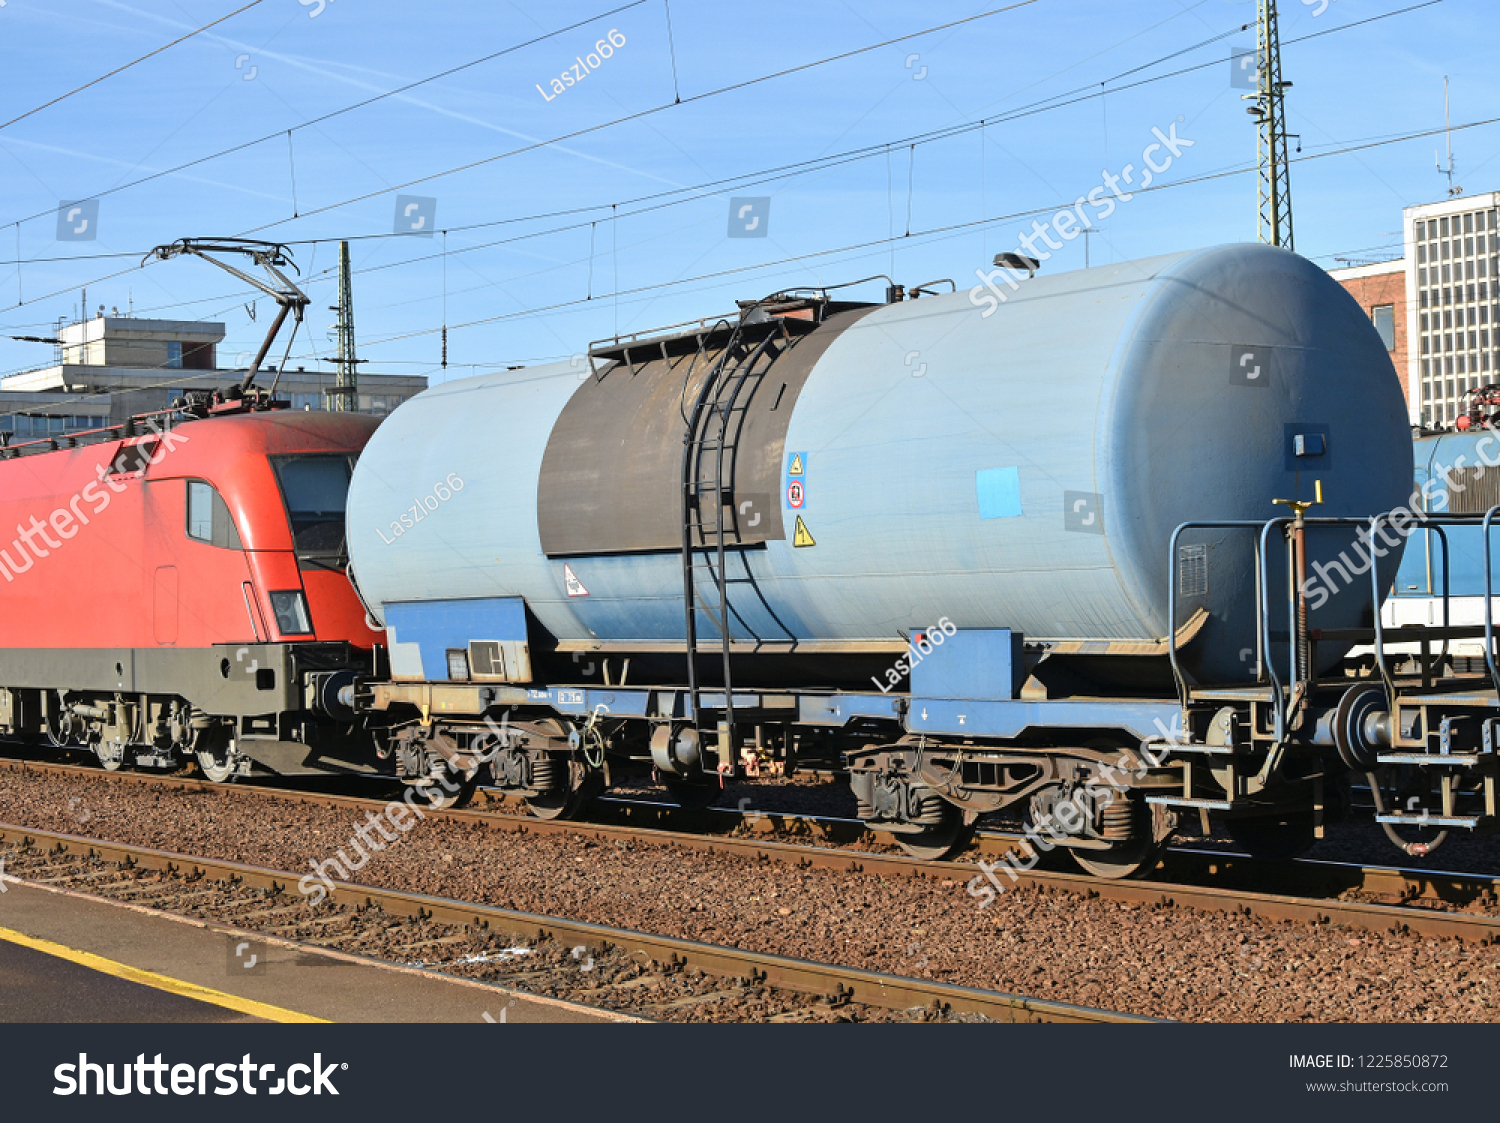 Freight train with oil transporter carriages
 #1225850872